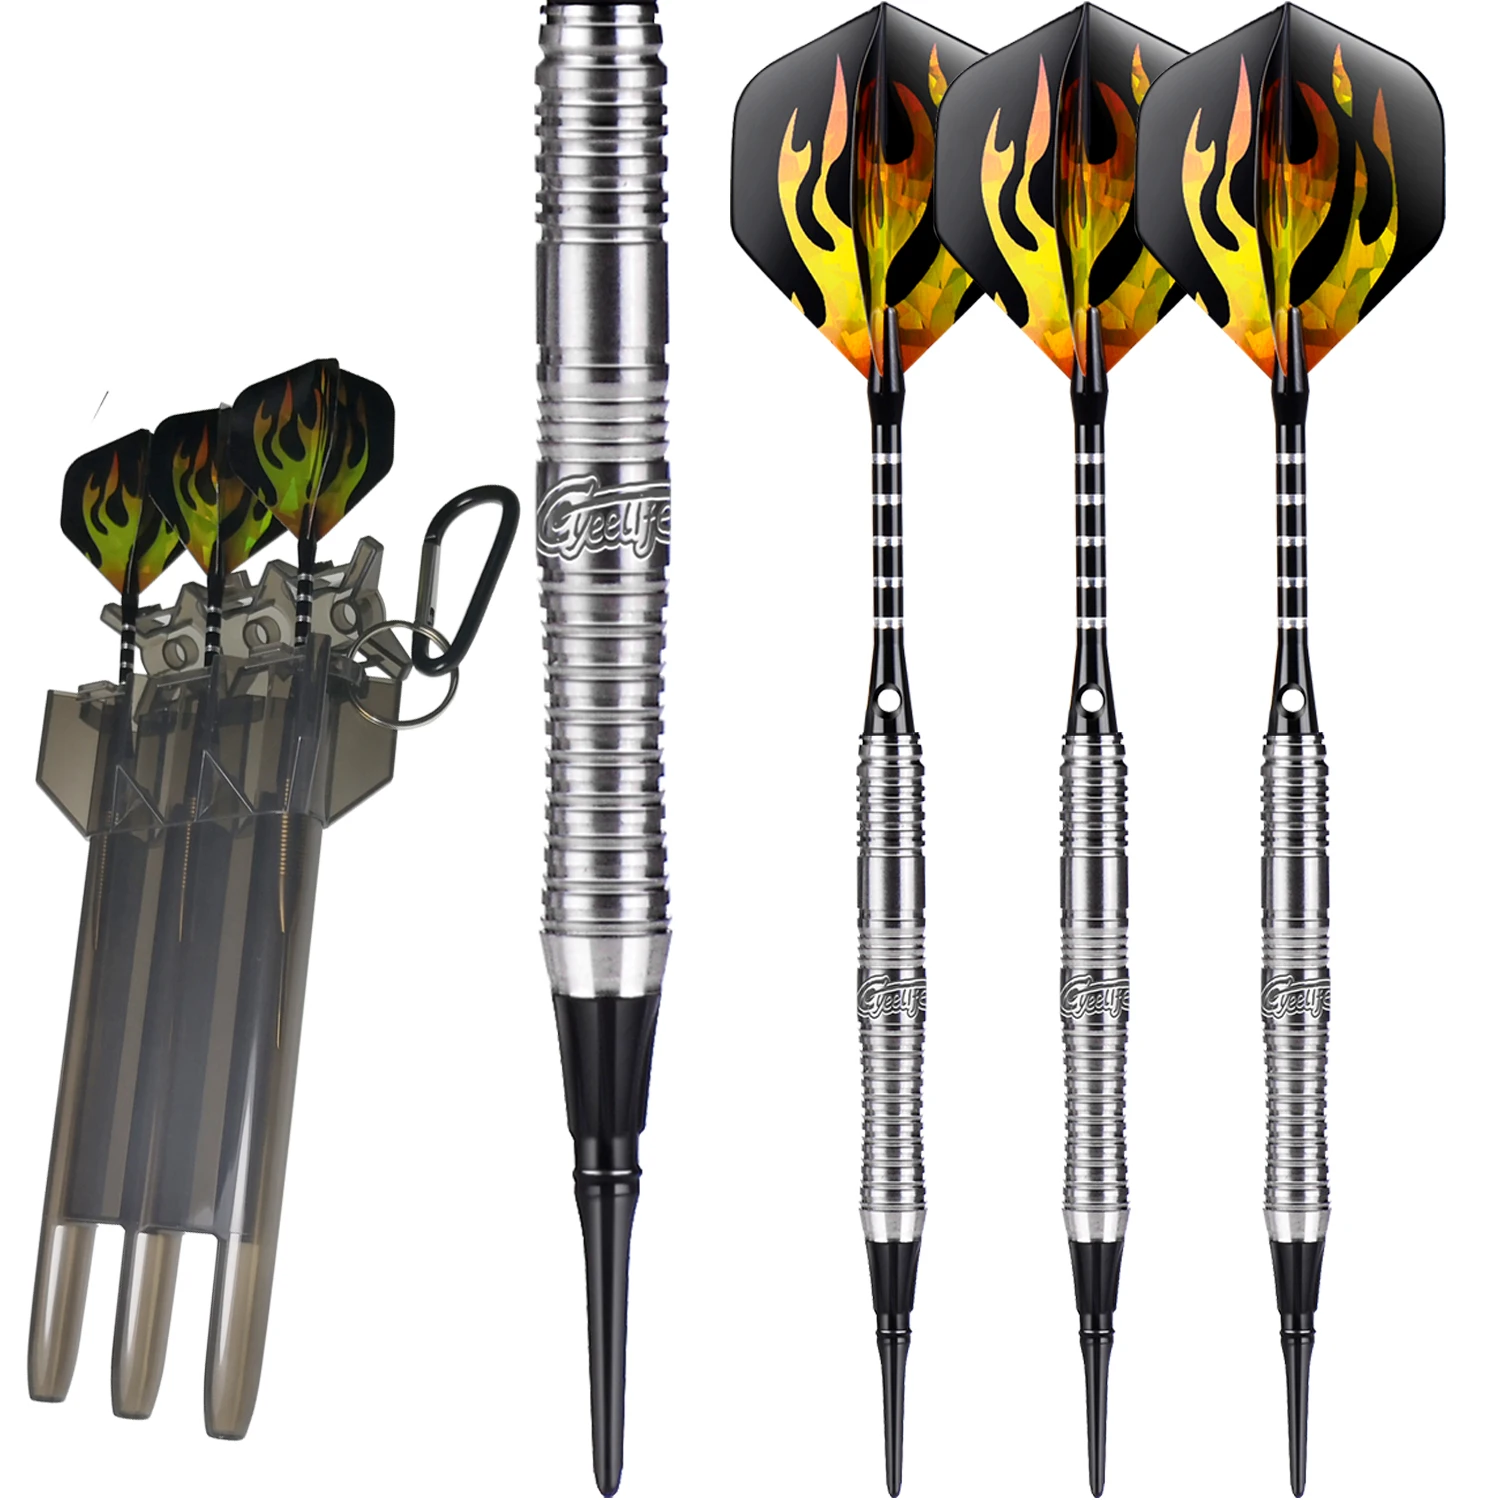 CyeeLife 90% Tungsten Soft tip darts 18g with carrying case,Aluminium Shafts+30 Points+Extra Flights